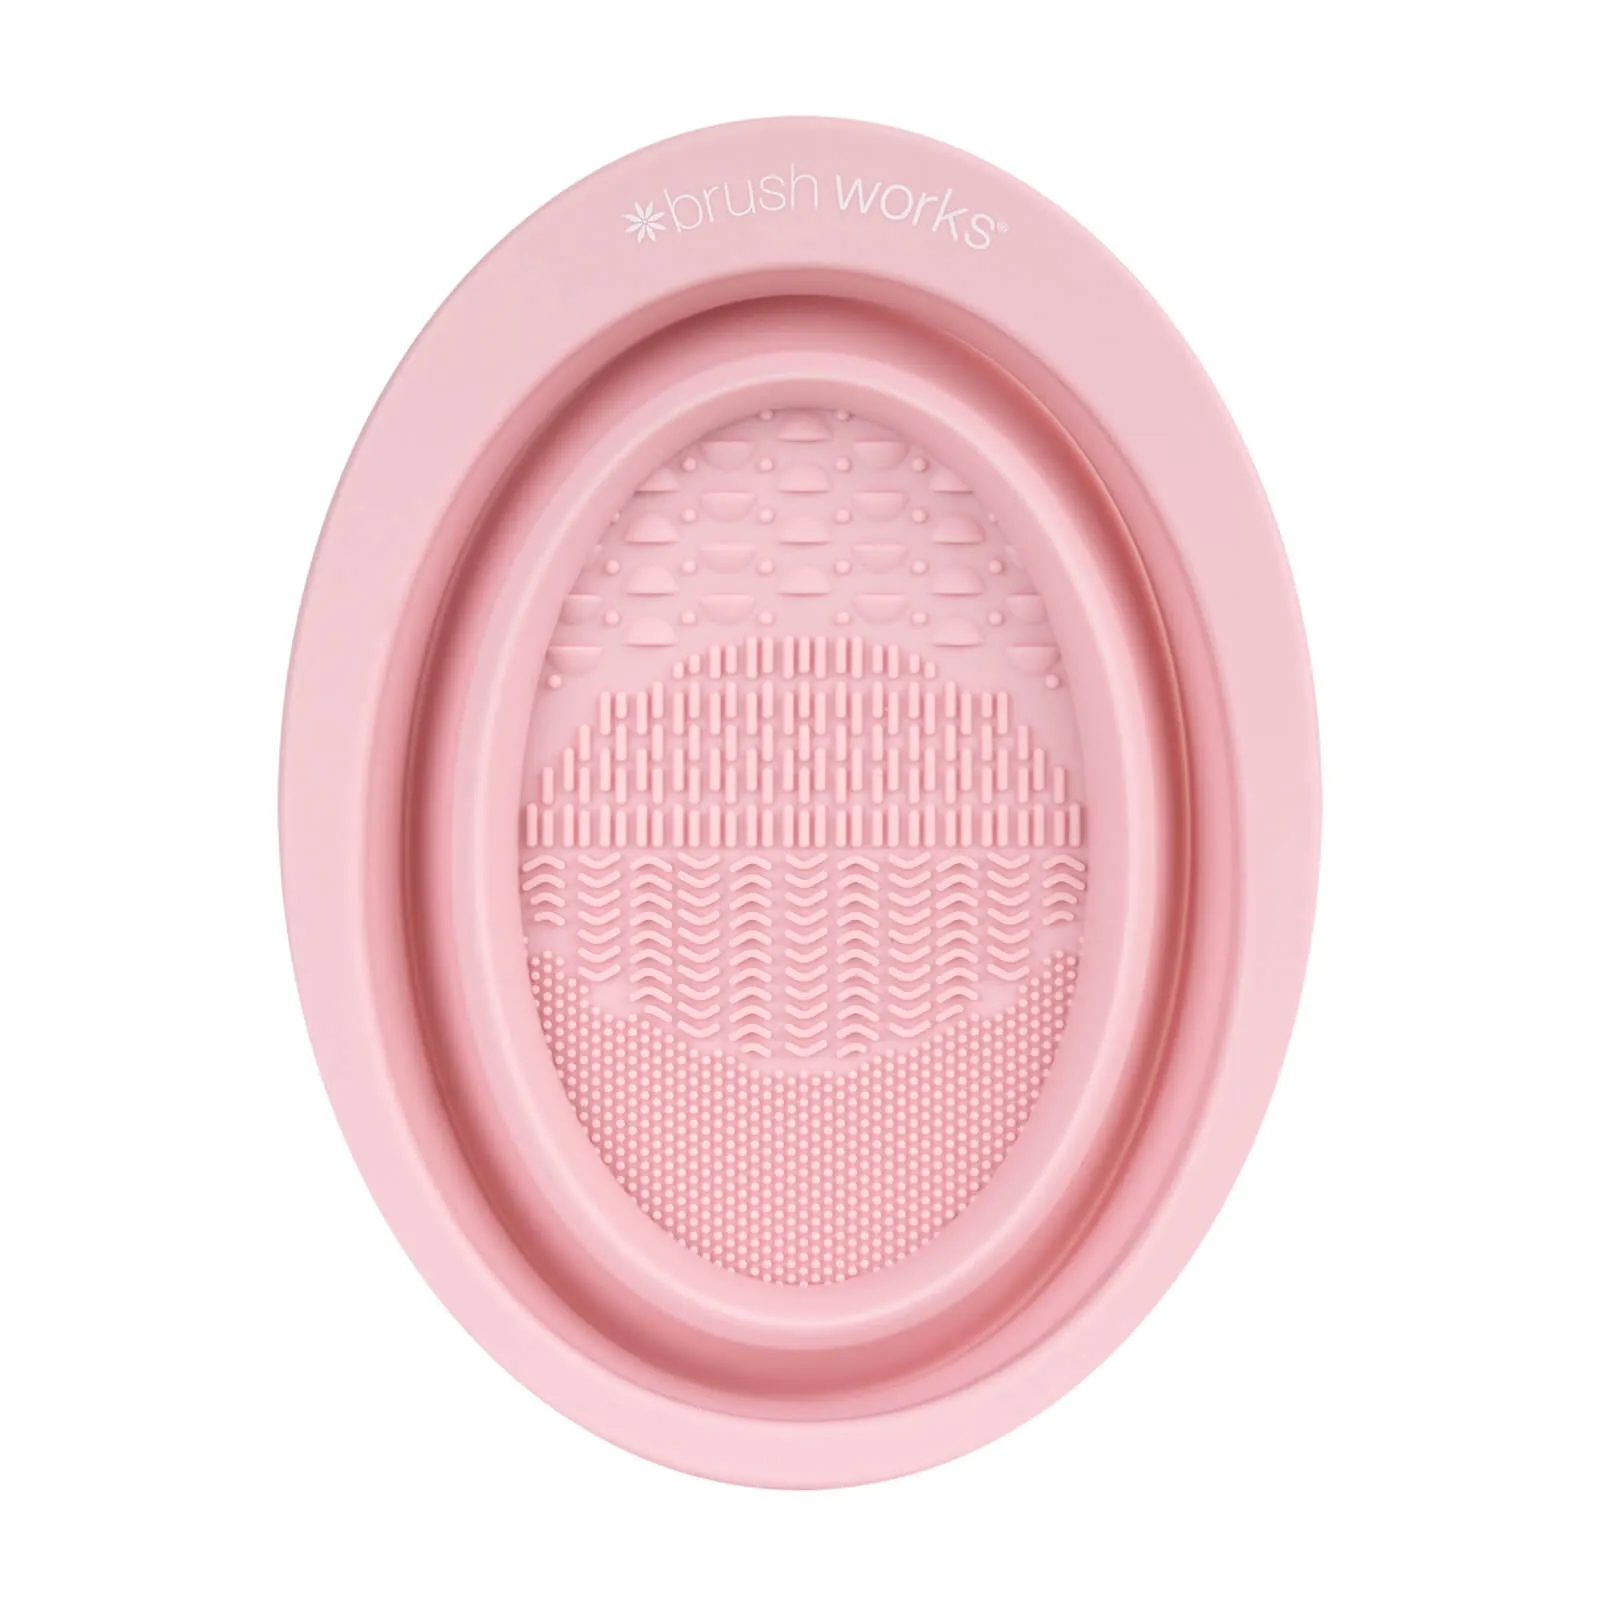  Silicone Makeup Brush Cleaning Bowl